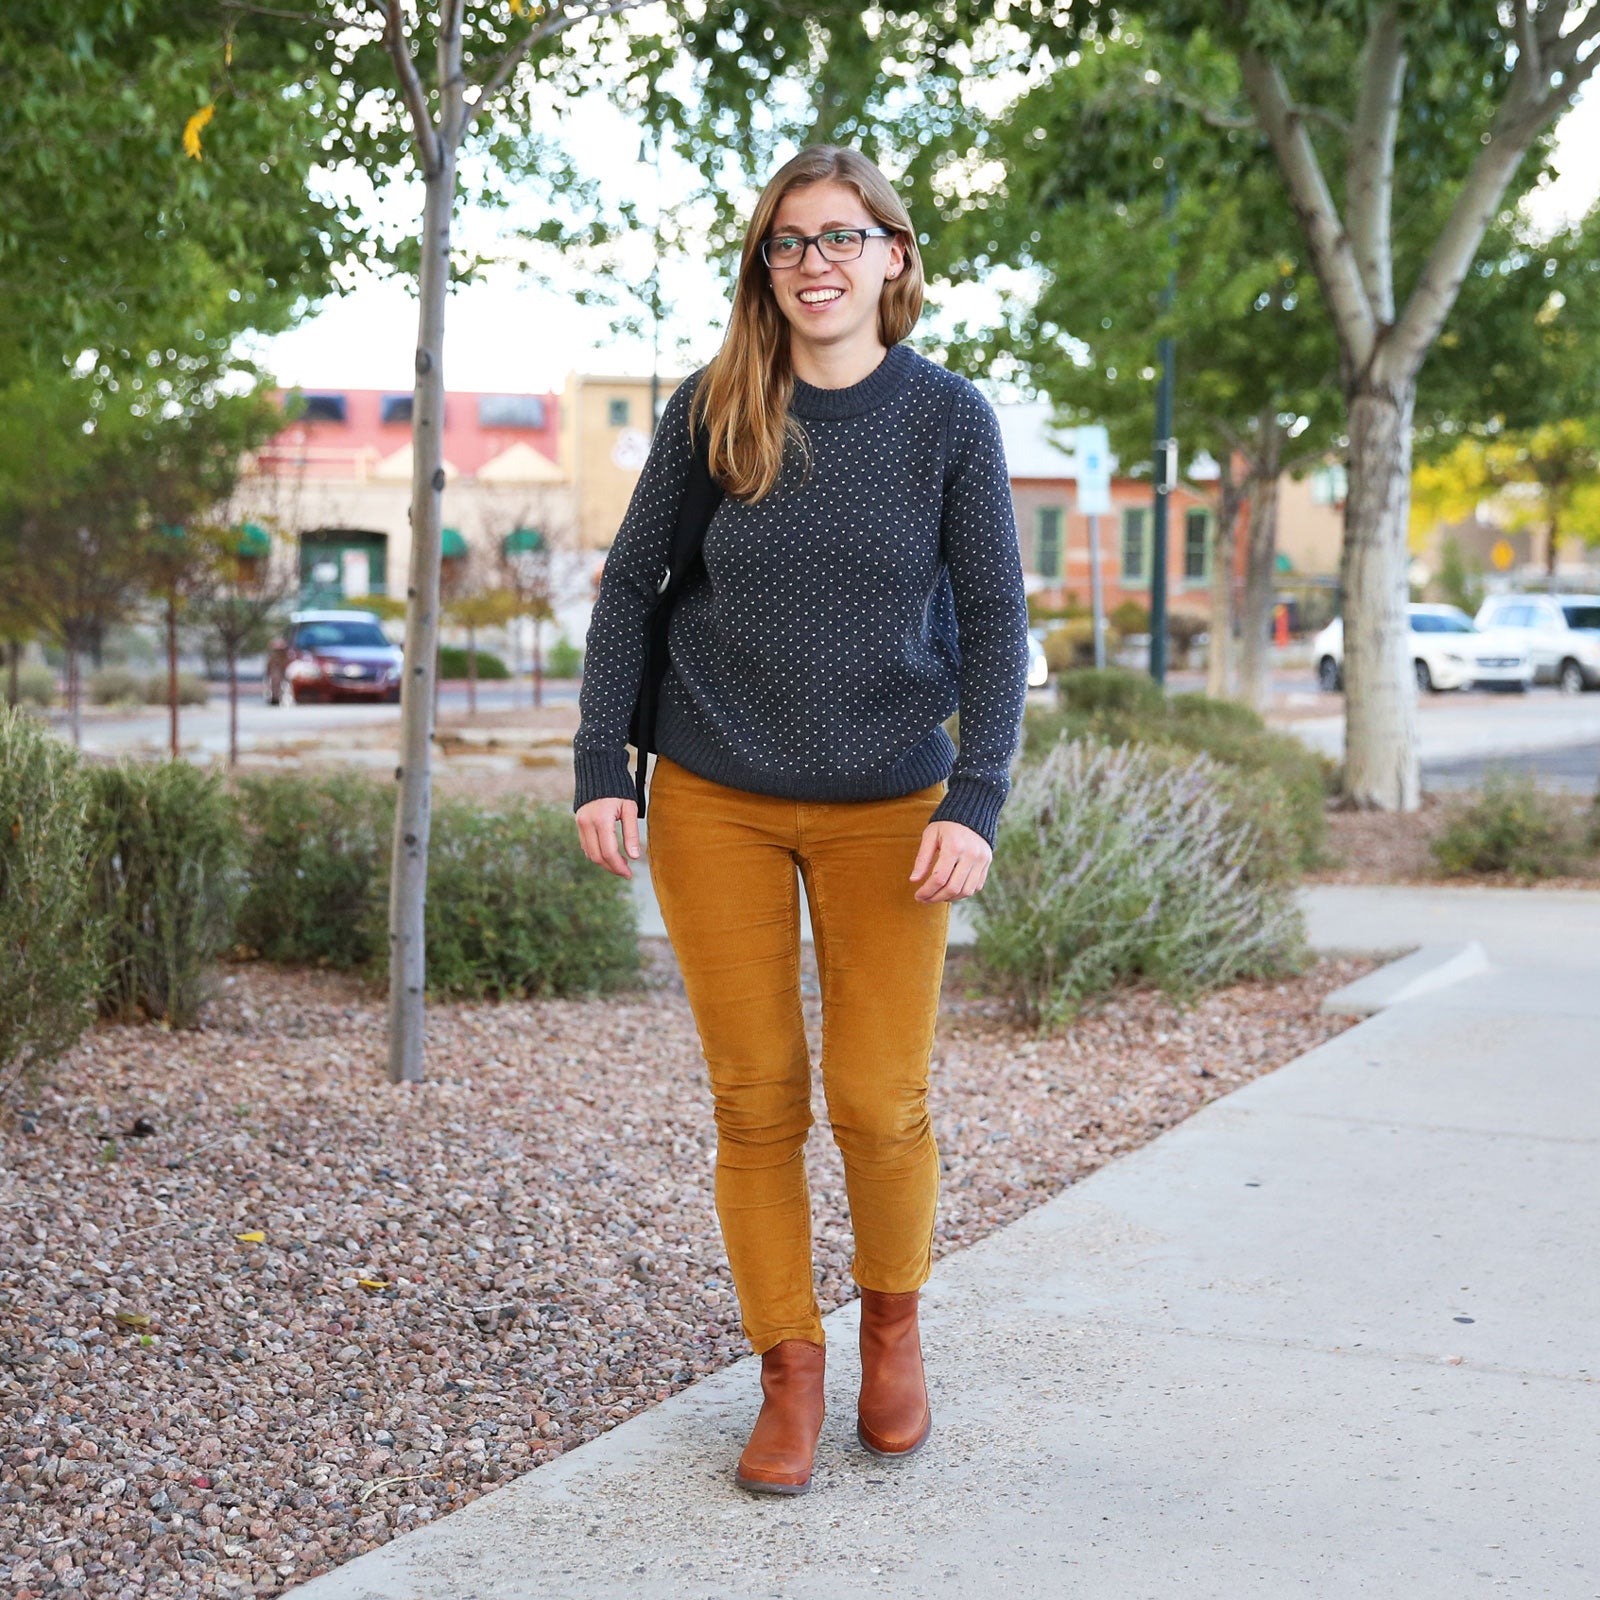 Our Gear Editor's Go-To Fall Outfit